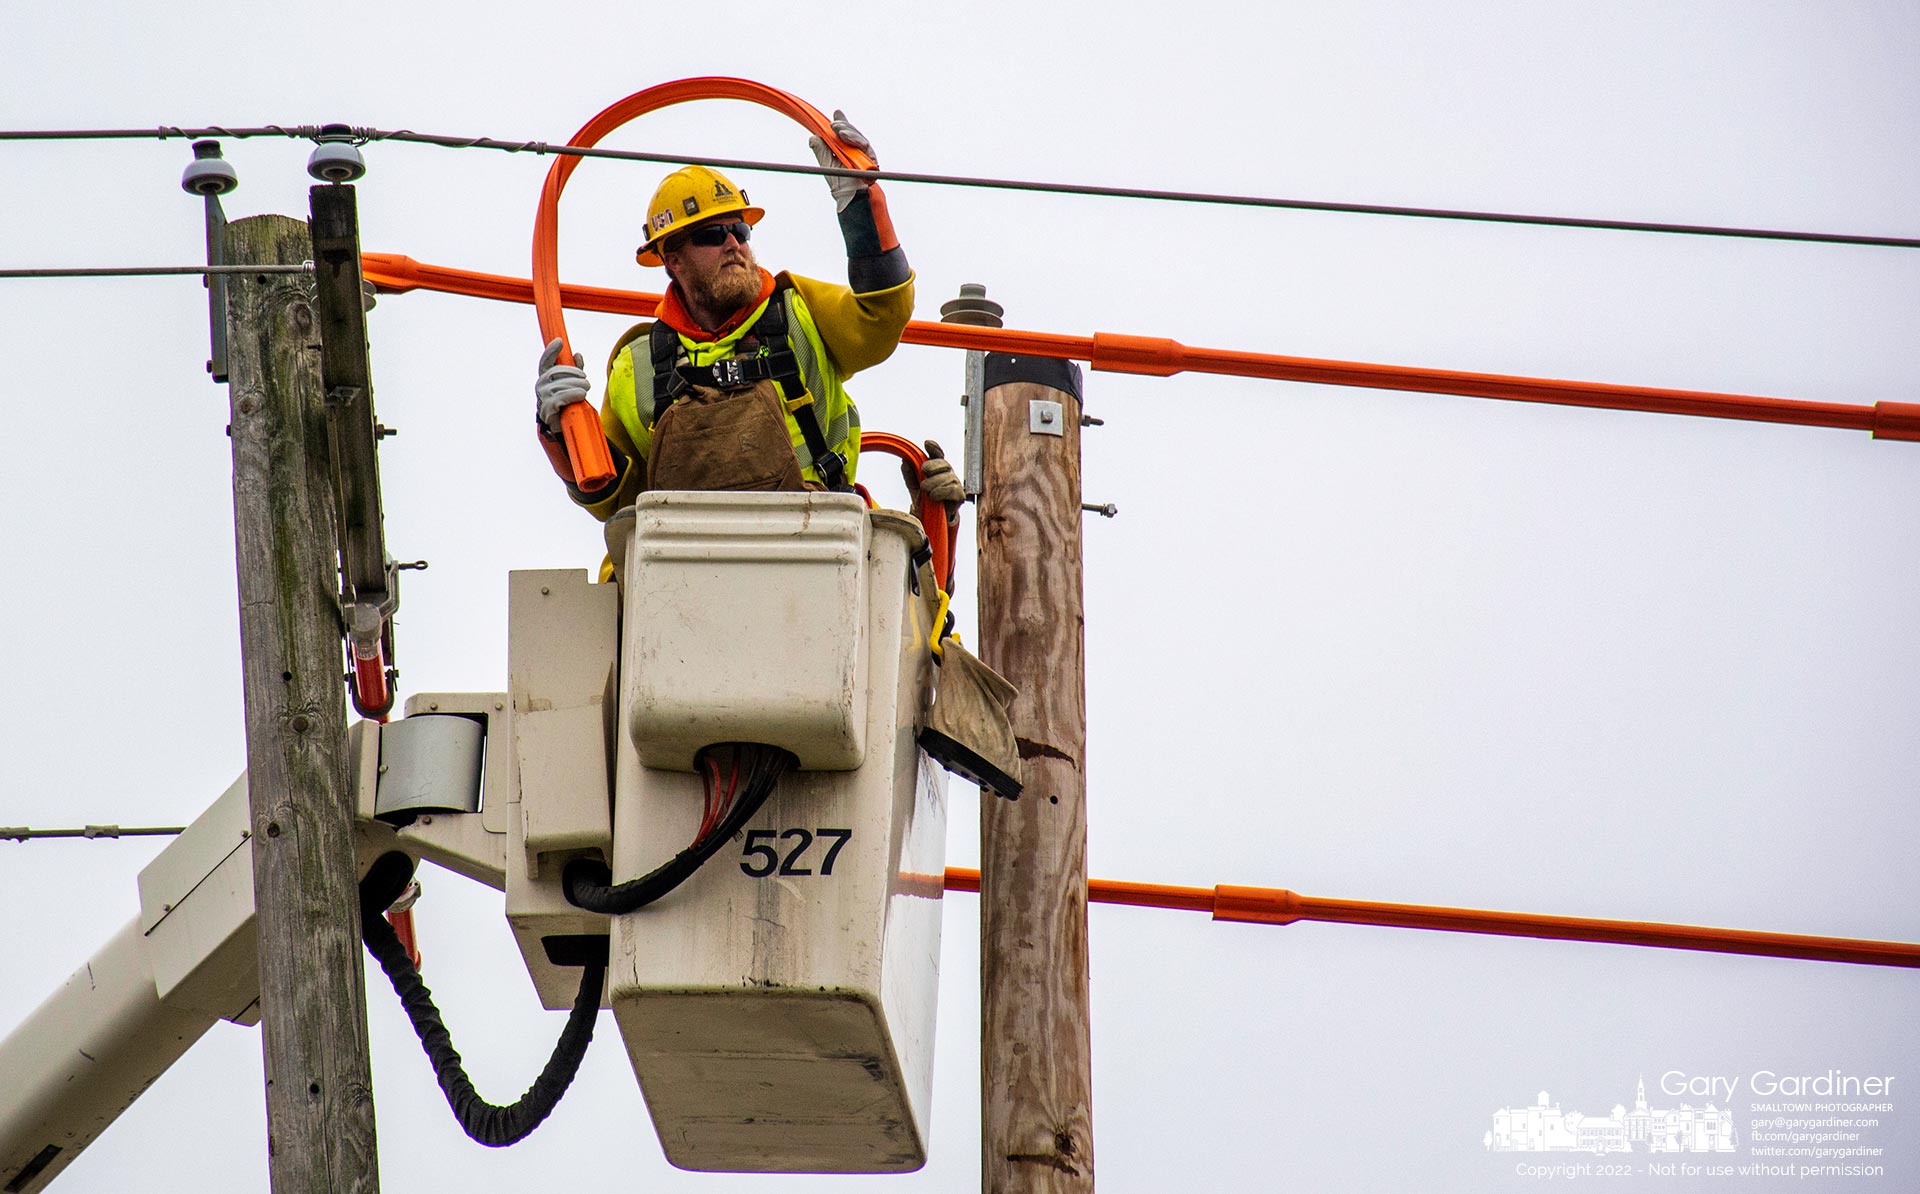 A city linesman twists a cable insulator making it easier to wrap one of the powerlines being transferred to a cross-member that will be installed on a replacement utility pole at Schrock and Cooper Roads. My Final Photo for Feb. 23, 2022.